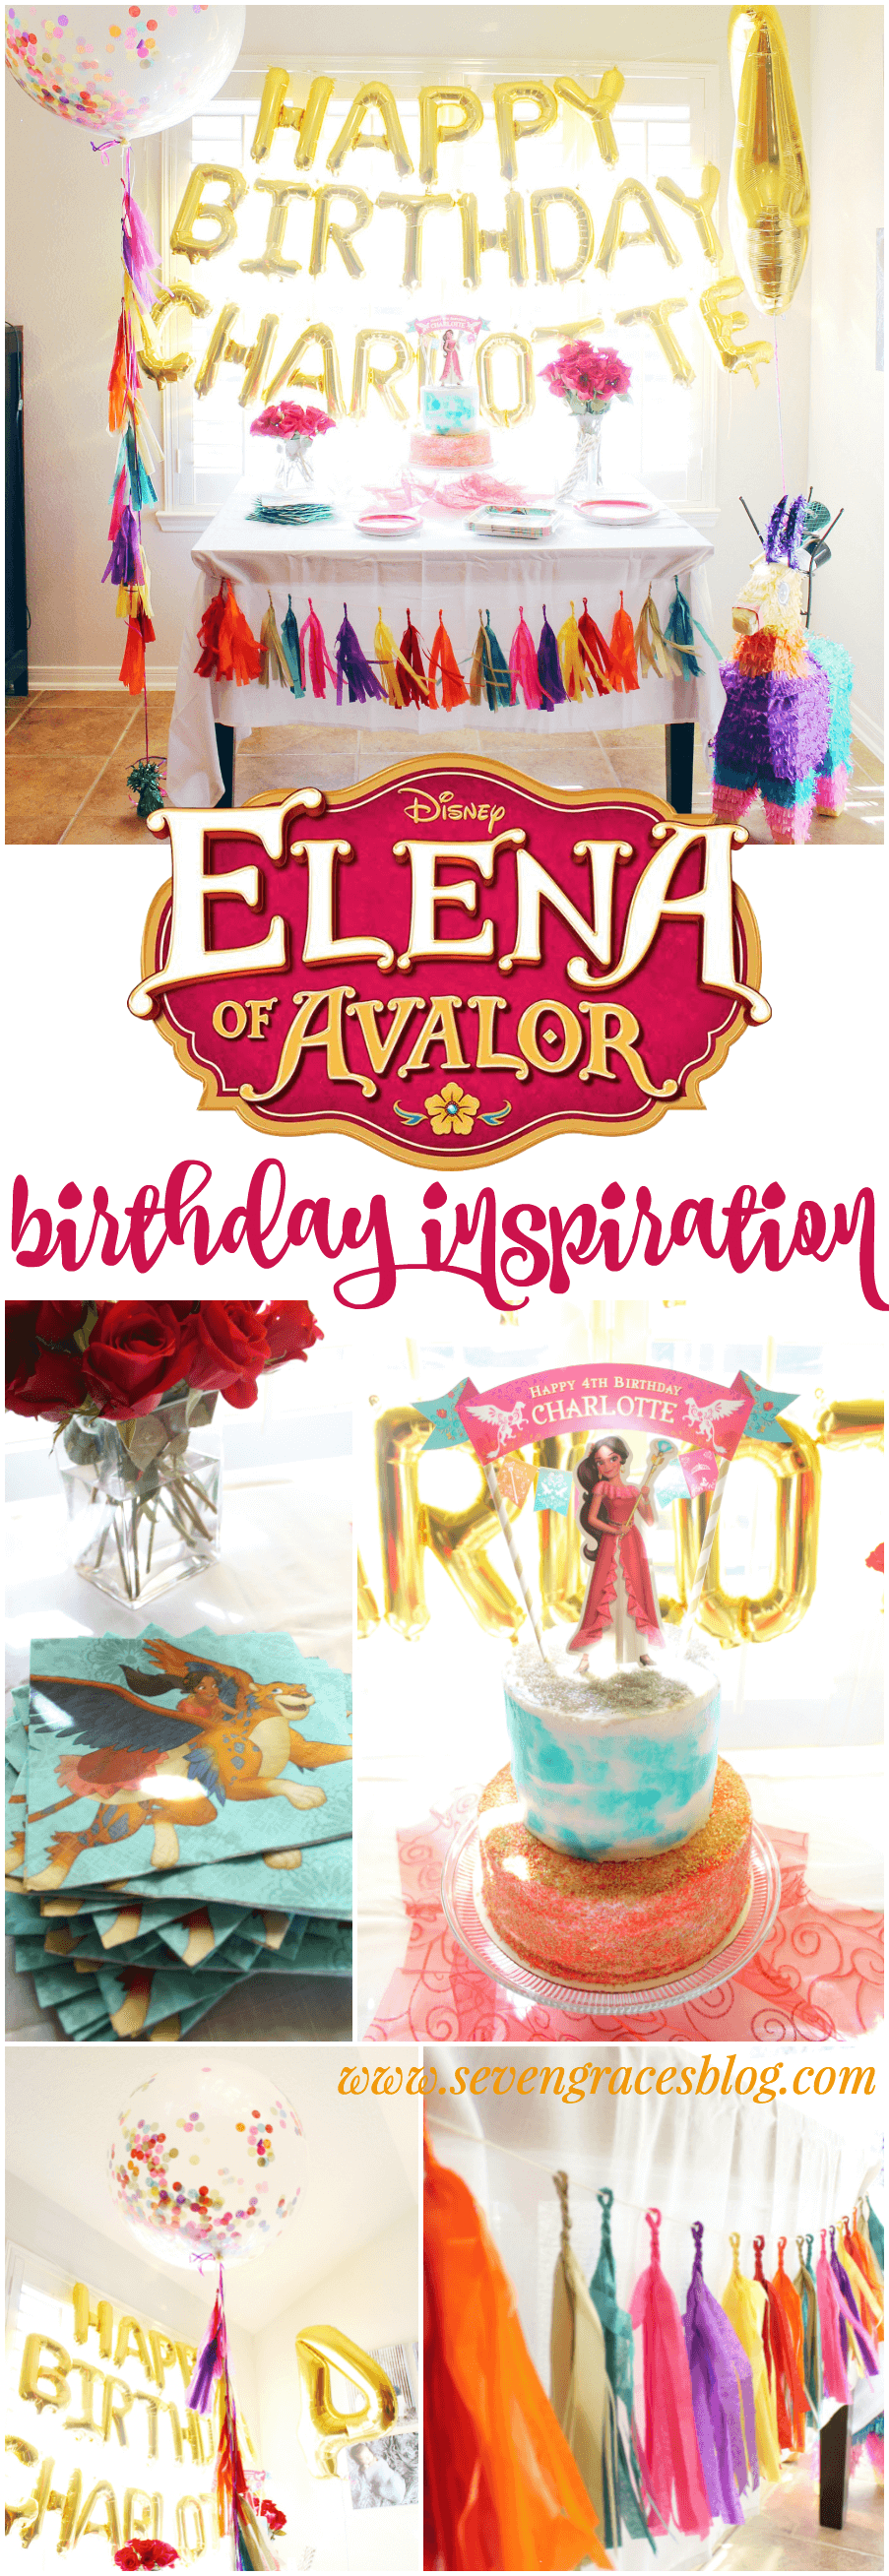 Elena of Avalor birthday party decor and inspiration. The cutest themed fiesta inspiration. 